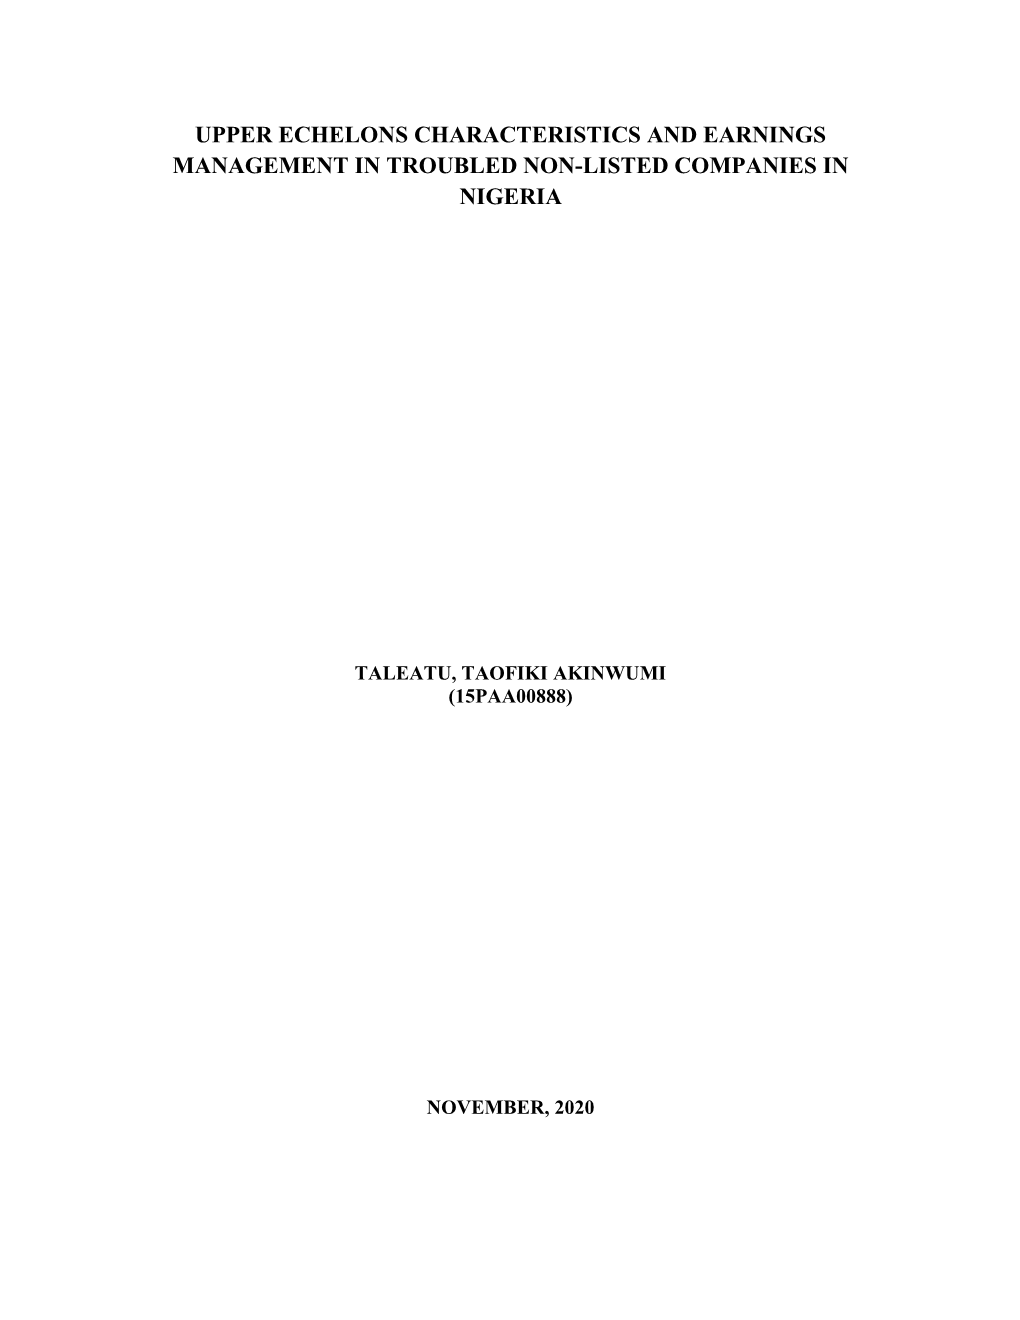 Upper Echelons Characteristics and Earnings Management in Troubled Non-Listed Companies in Nigeria